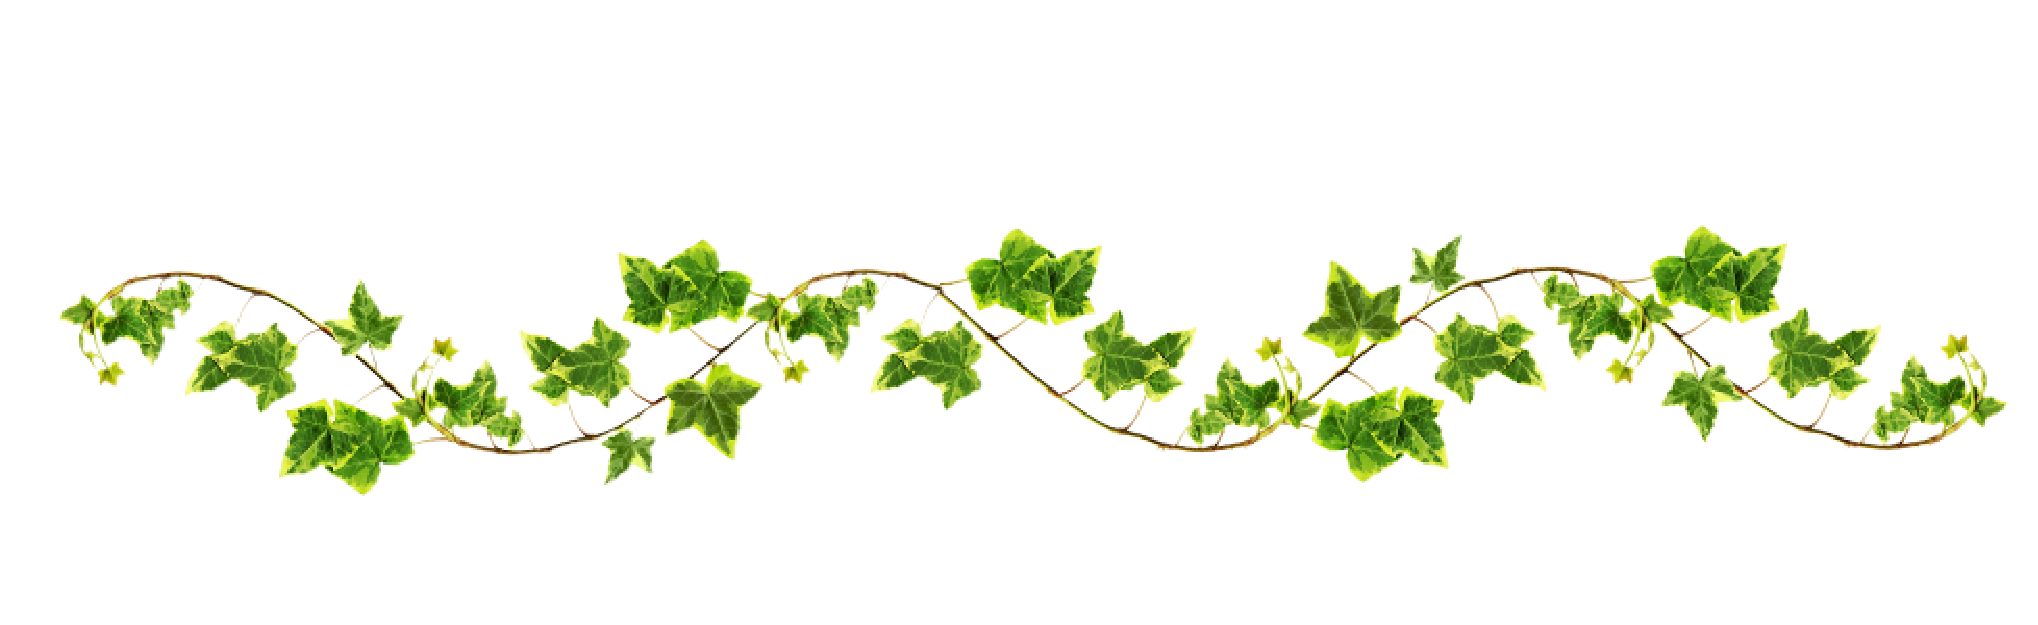 Free Green Vine Png, Download Free Green Vine Png png images, Free